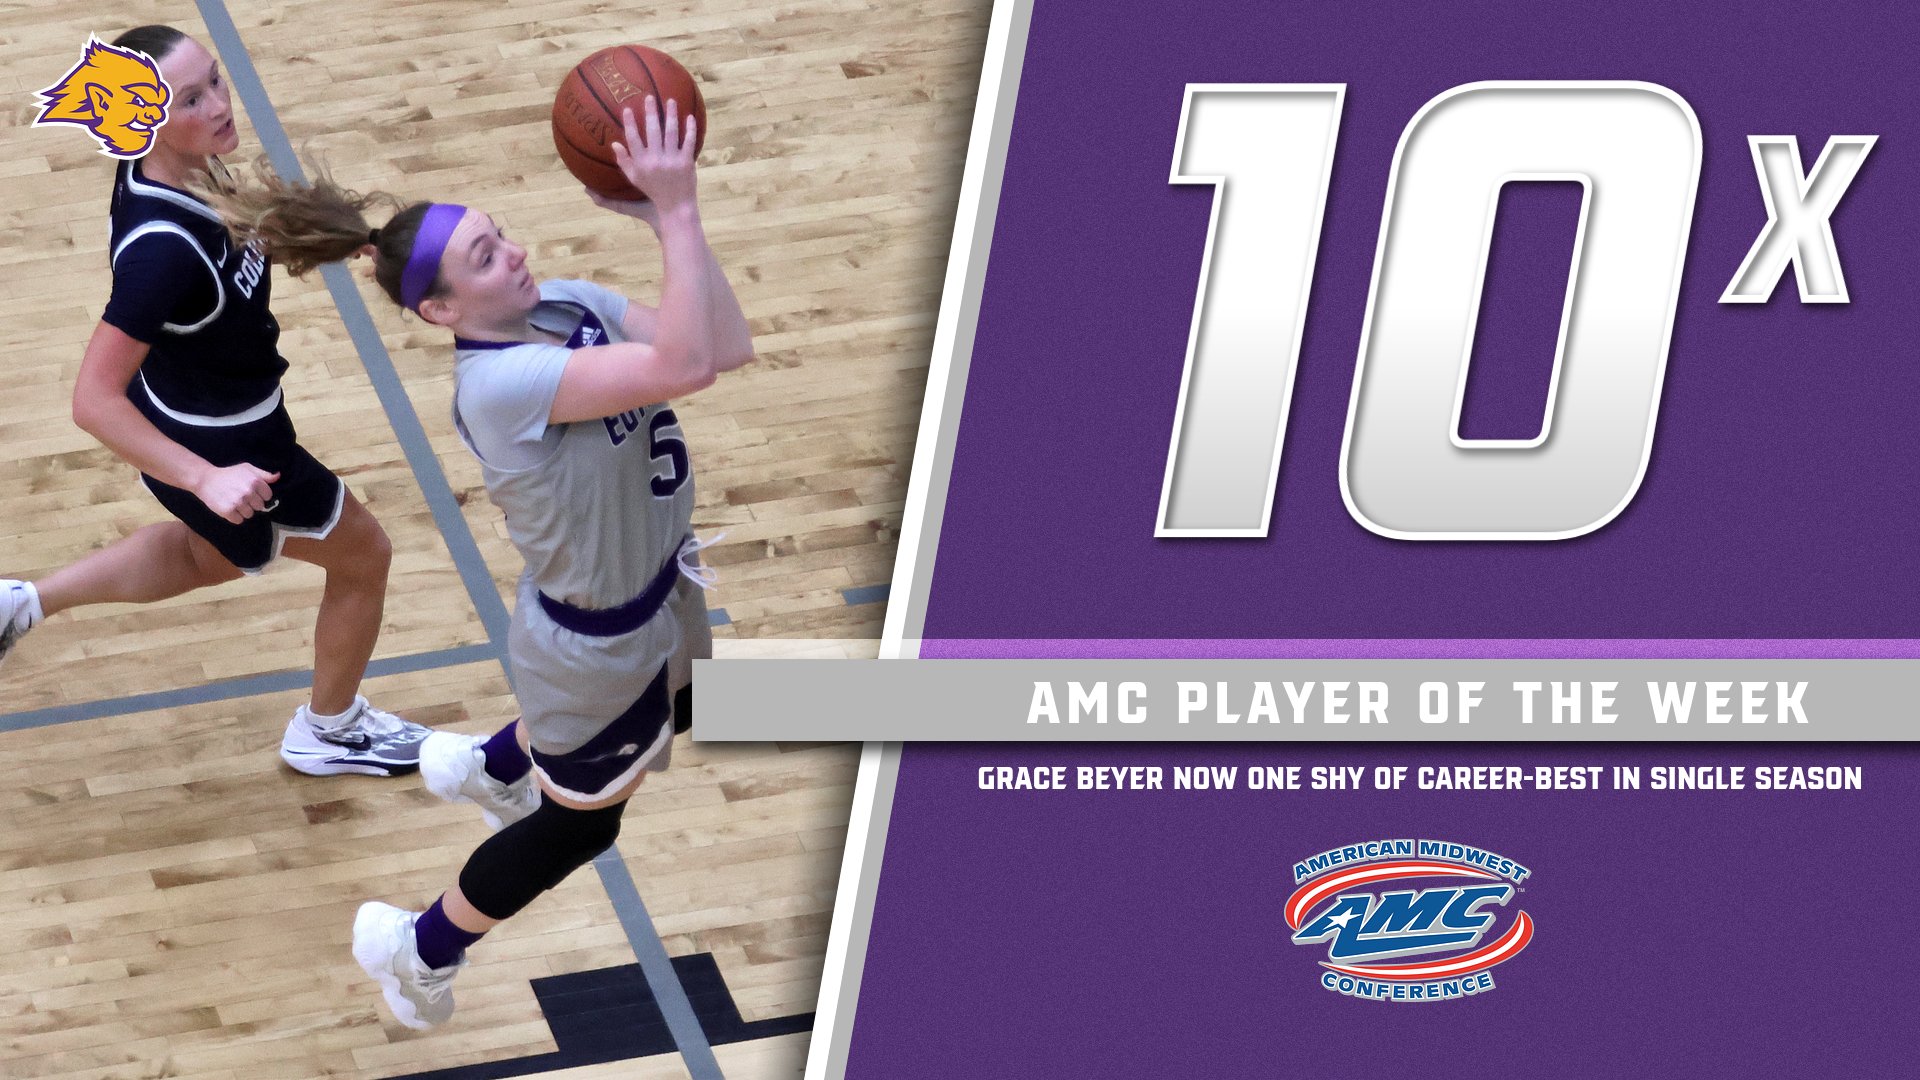 Another week, another AMC Player of the Week award for Beyer